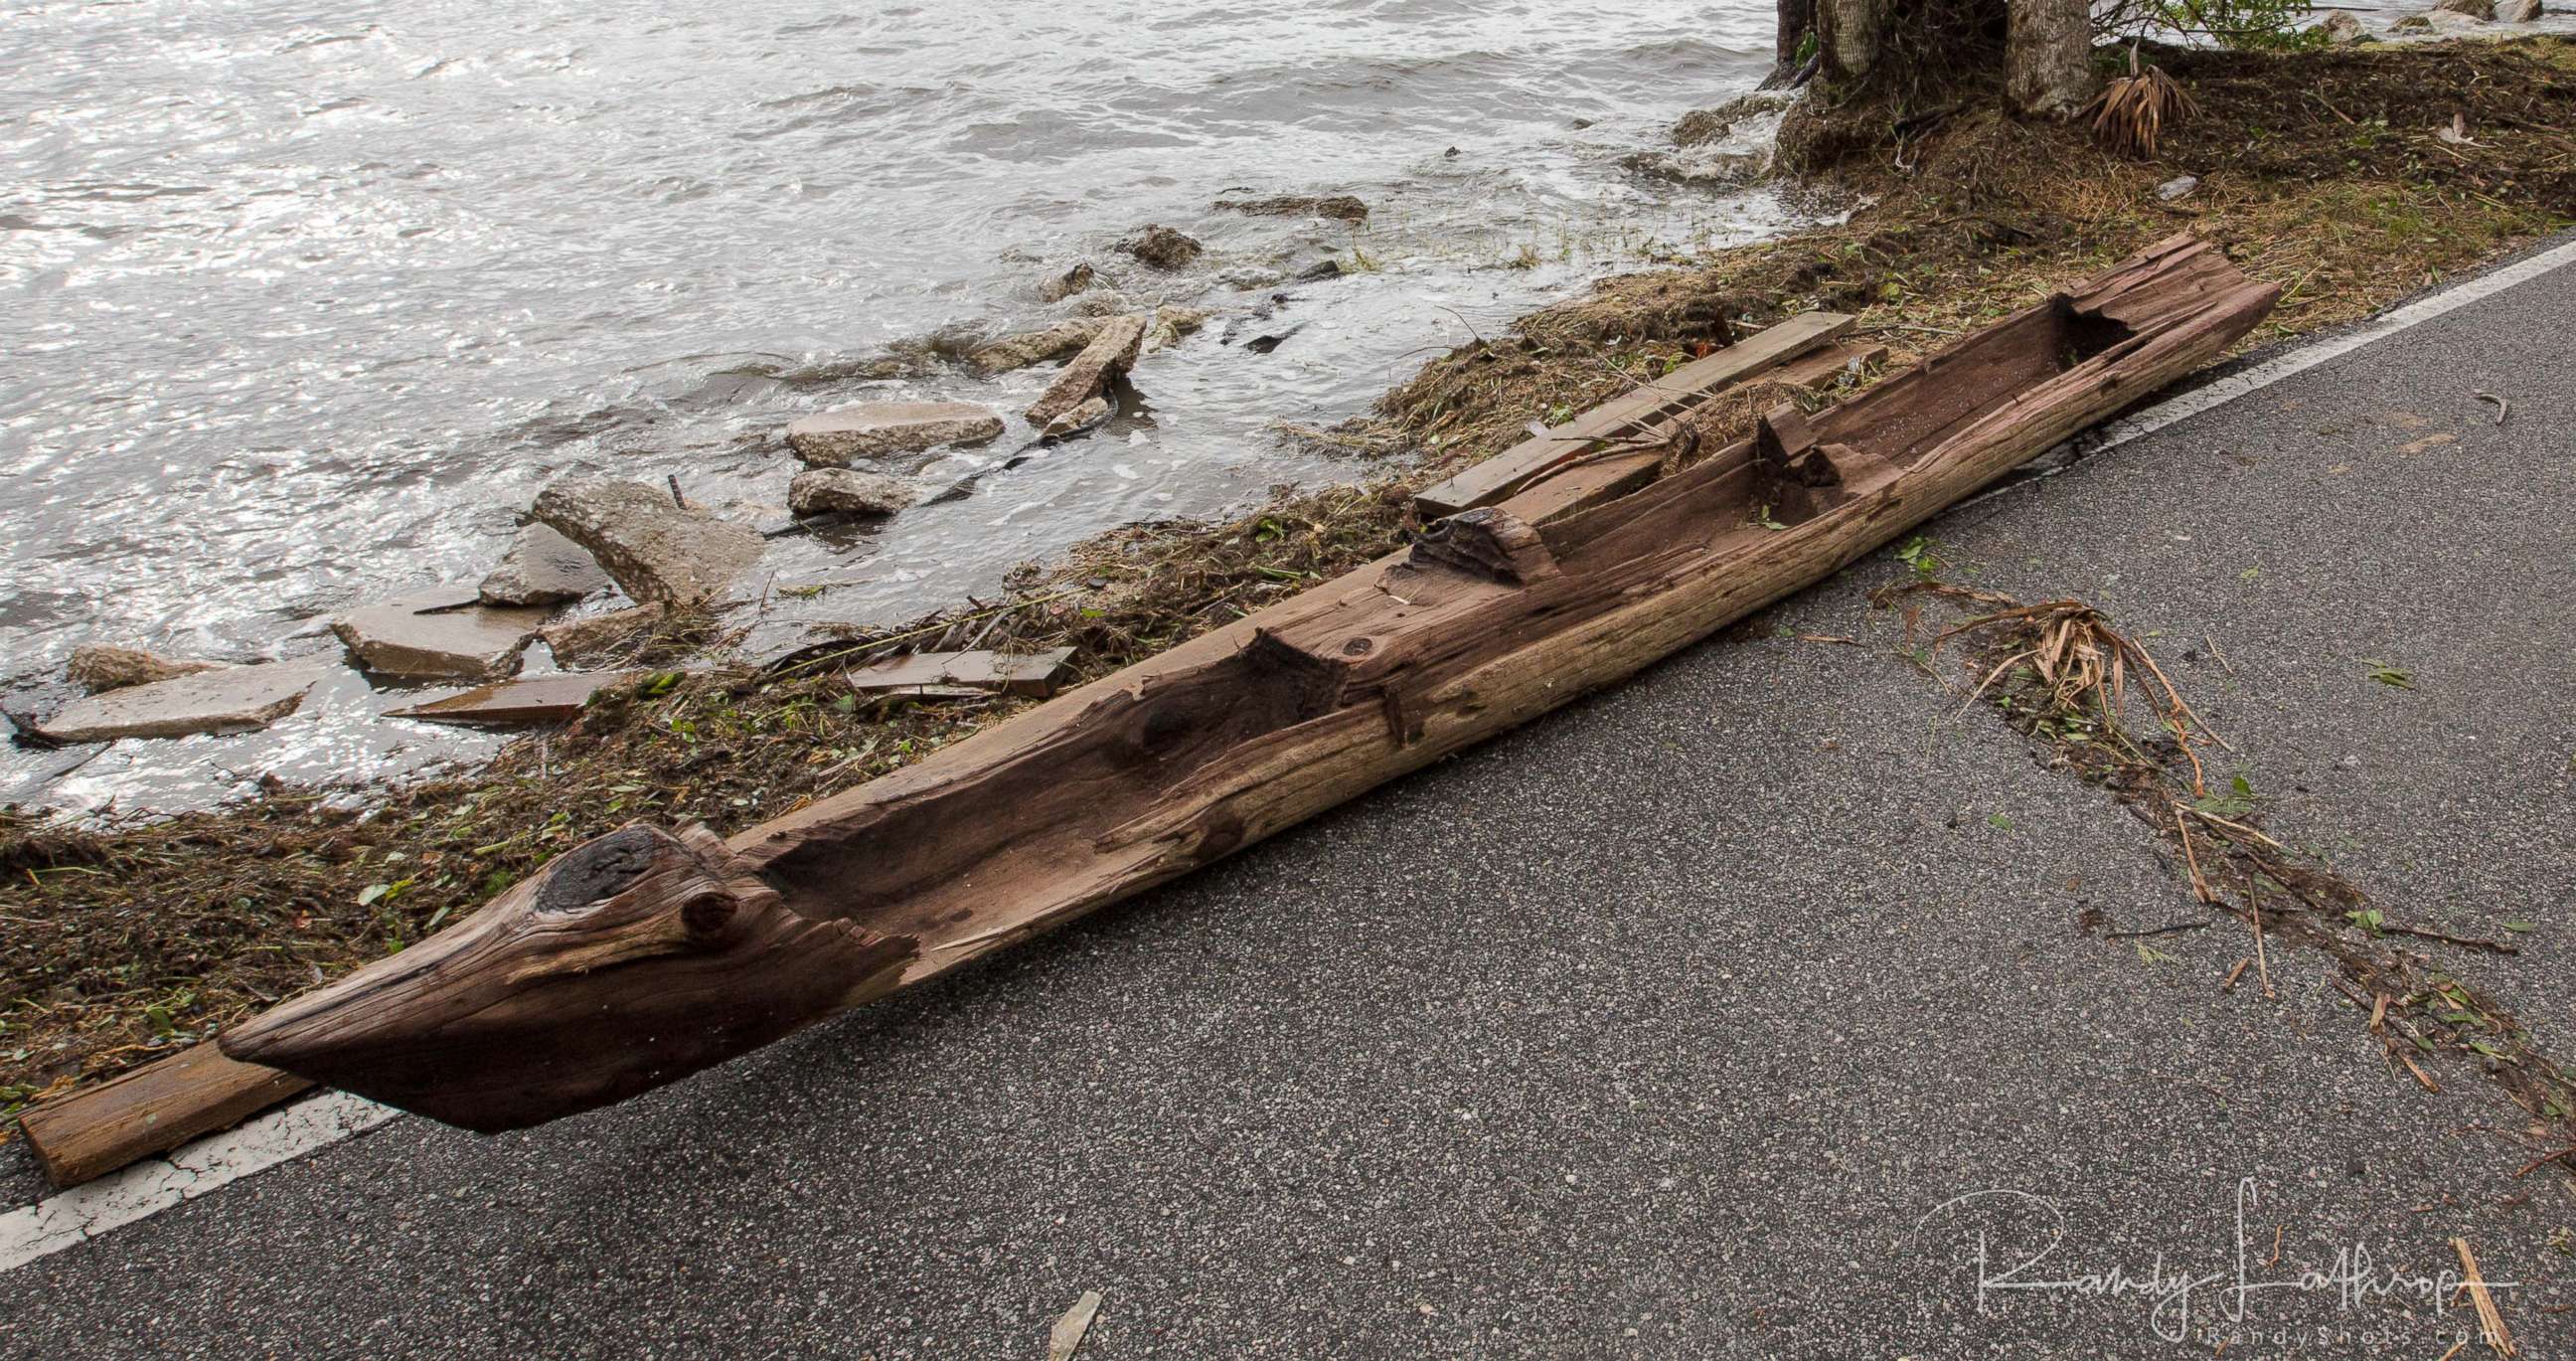 PHOTO: Randy Lathrop of Cocoa, Fla., discovered the historic dugout canoe, Sept. 11, 2017, after Irma struck the coast.